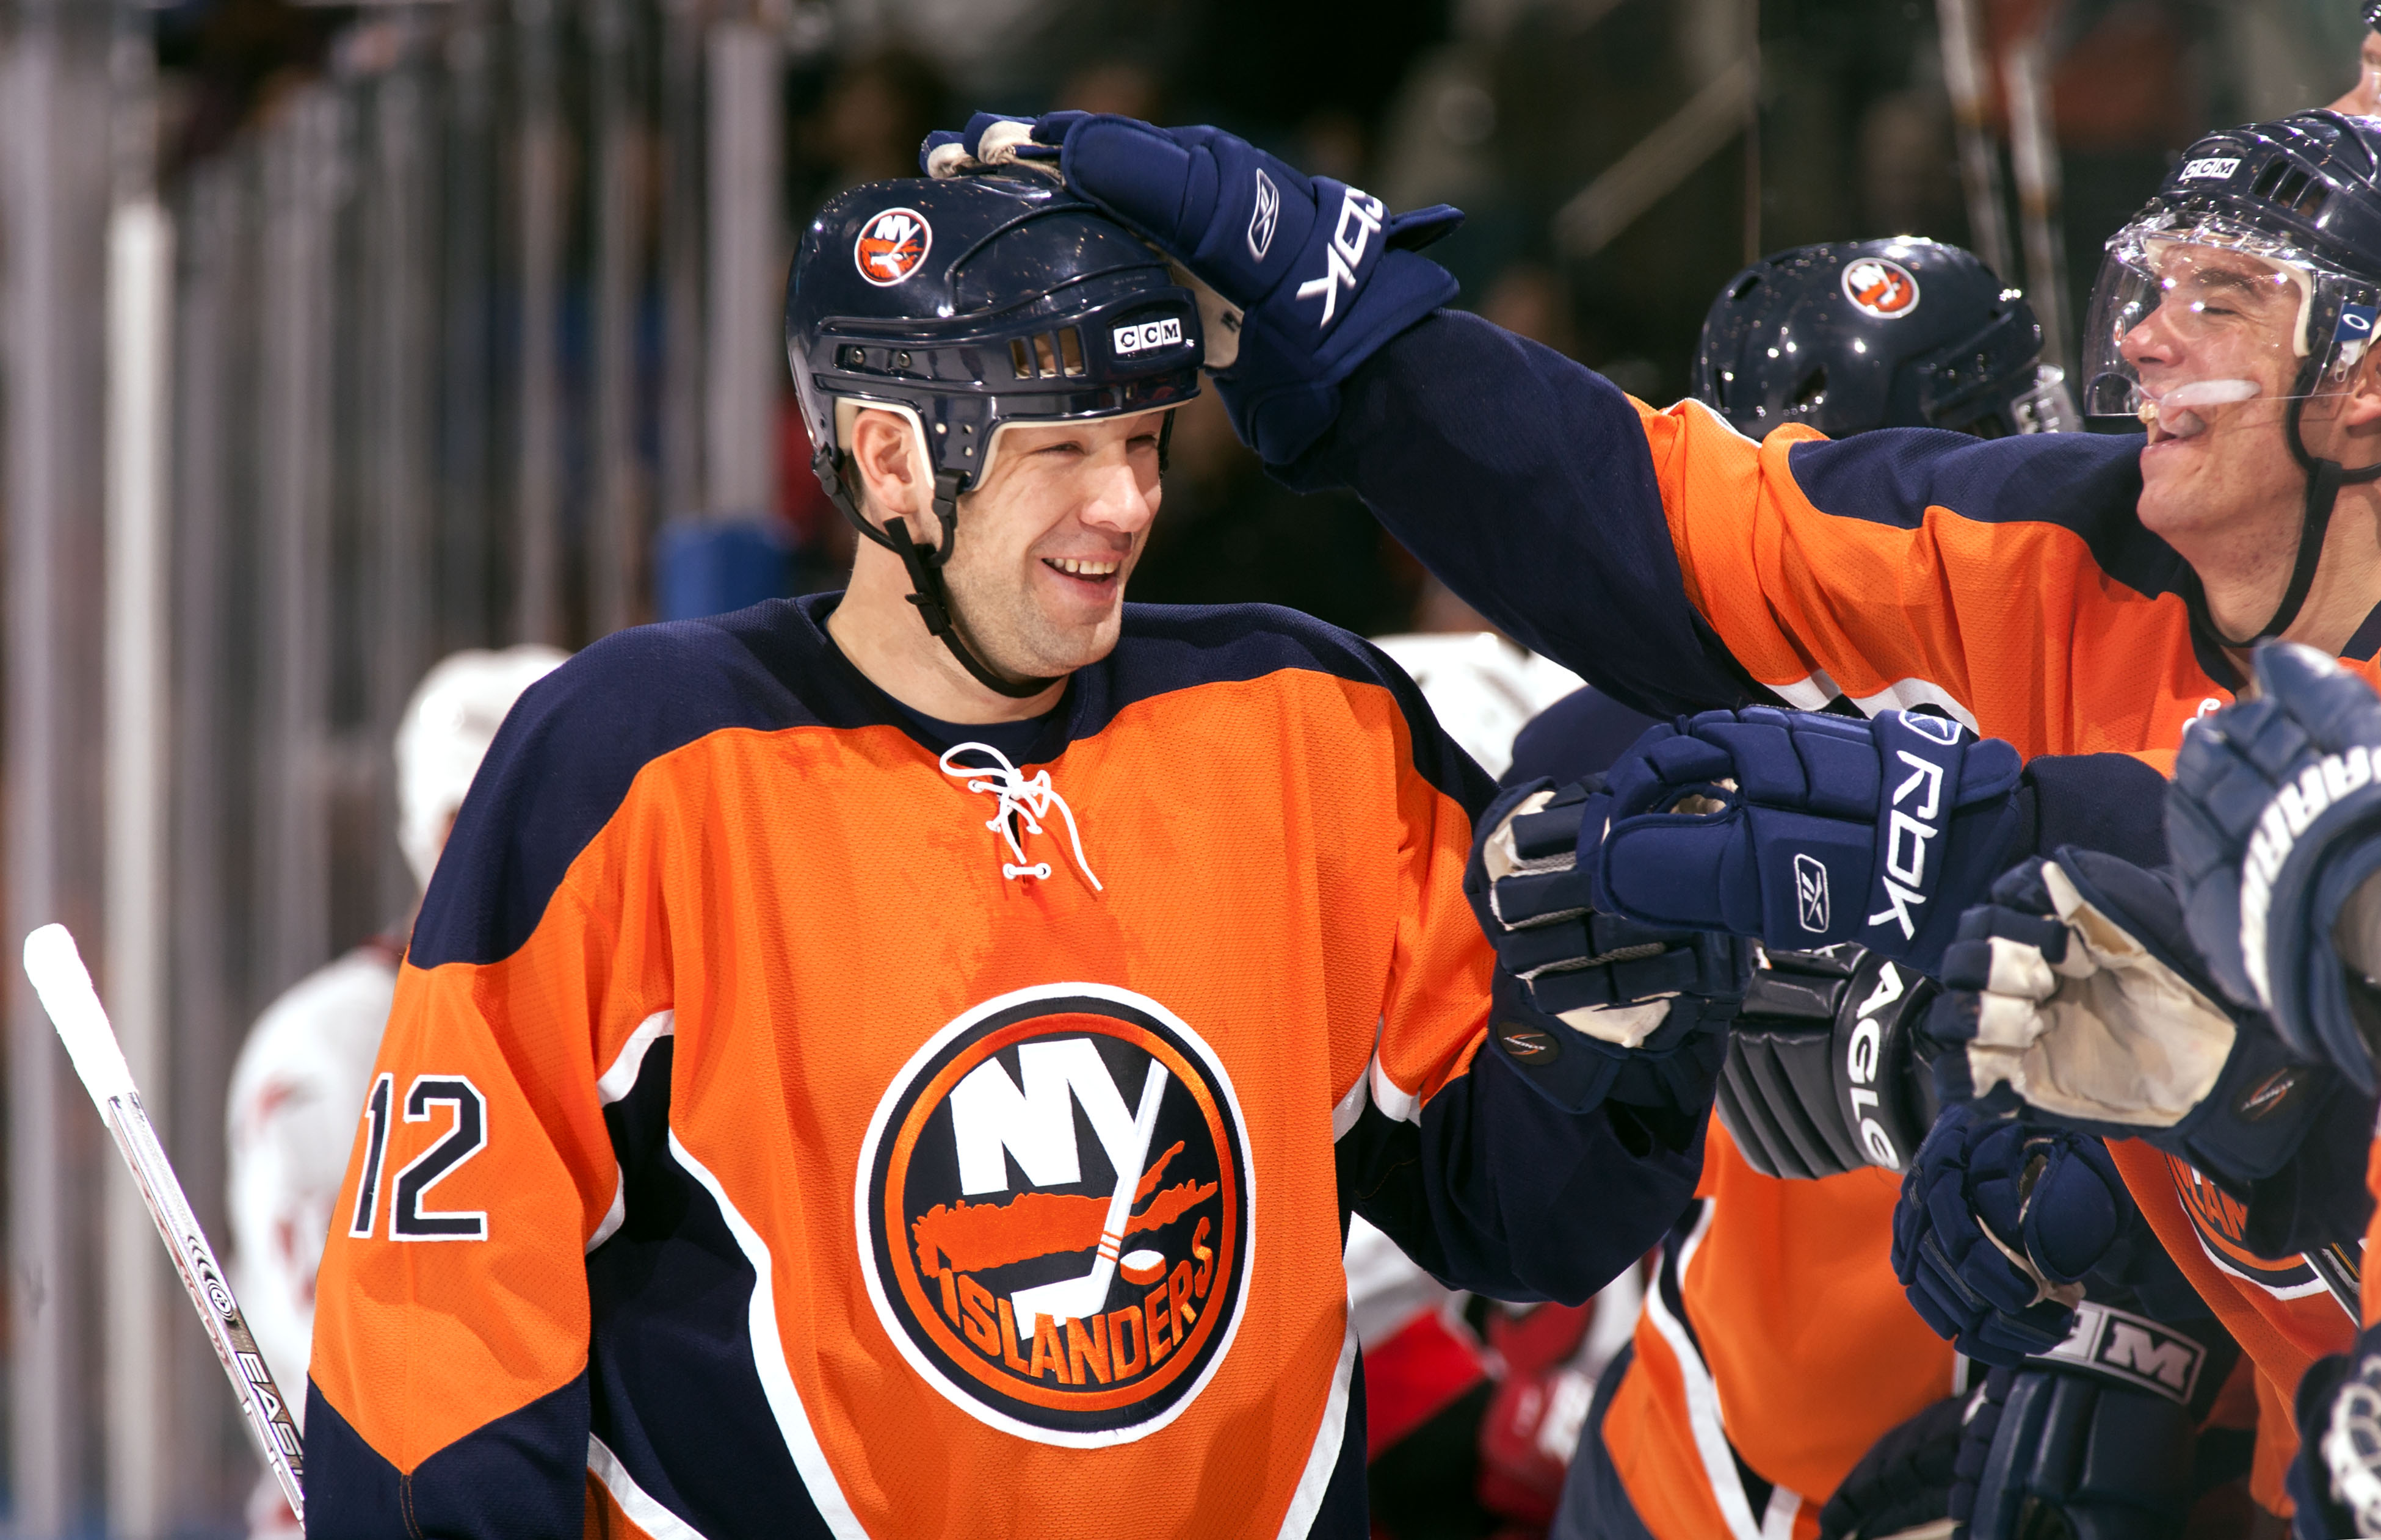 New York Islanders left wing Chris Simon (12) celebrates with teammates against the Carolina Hurricanes at Nassau Veterans Memorial Coliseum in Uniondale, N.Y., on Oct. 21, 2006.